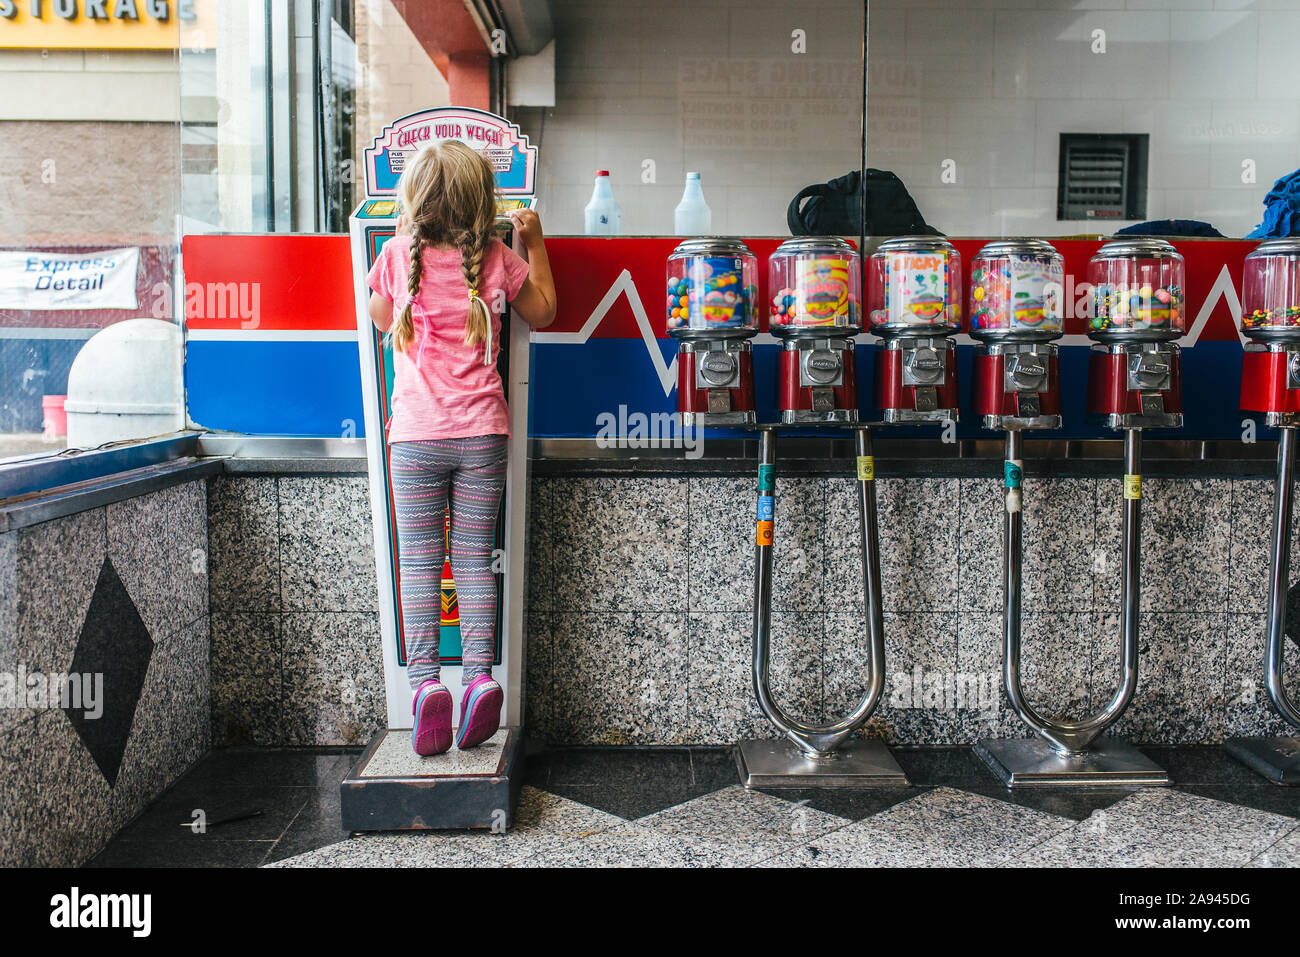 A girl stands on a scale at a car wash next to gumball machines. Stock Photo